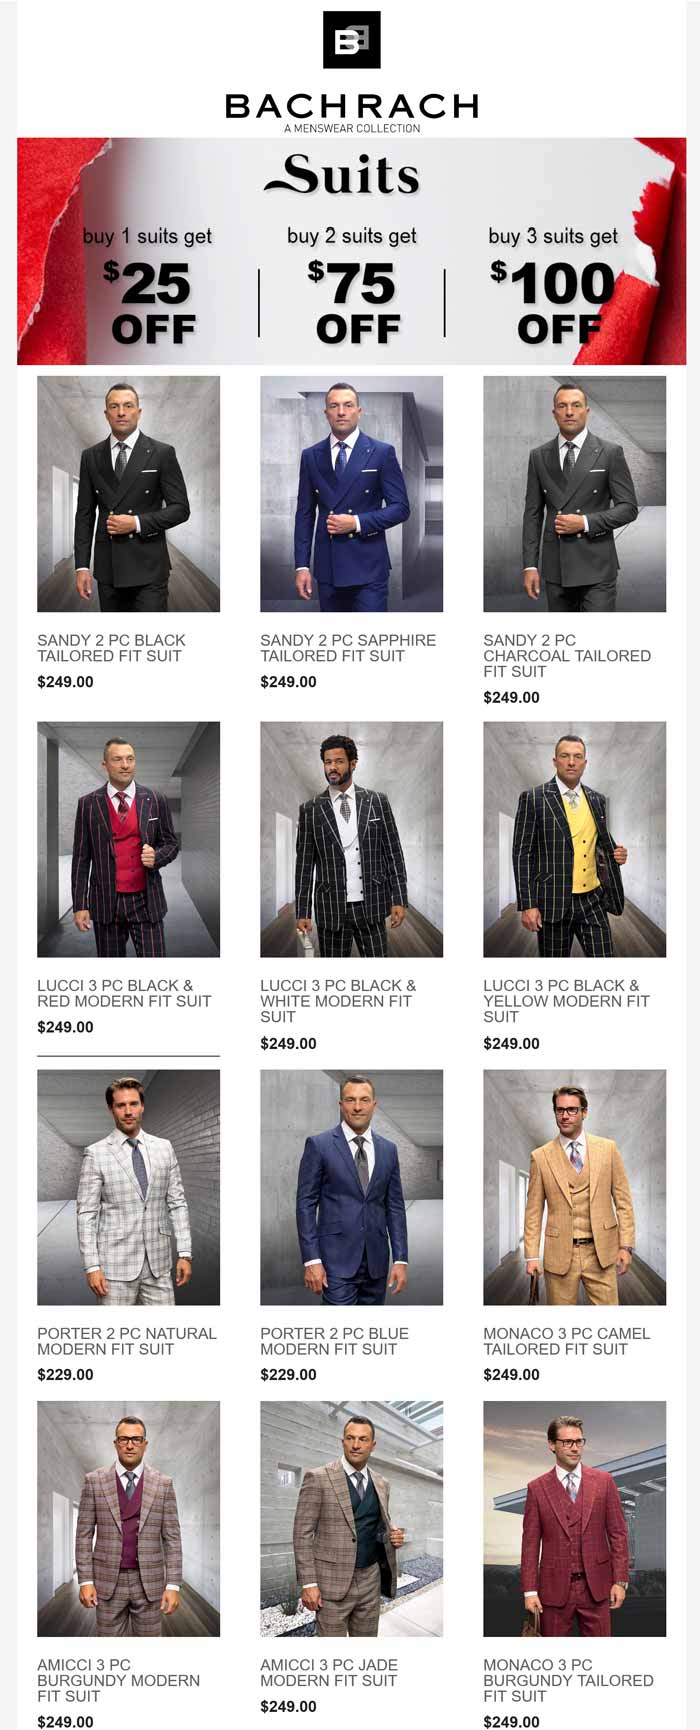 $25-$100 off the $250 suits at Bachrach #bachrach